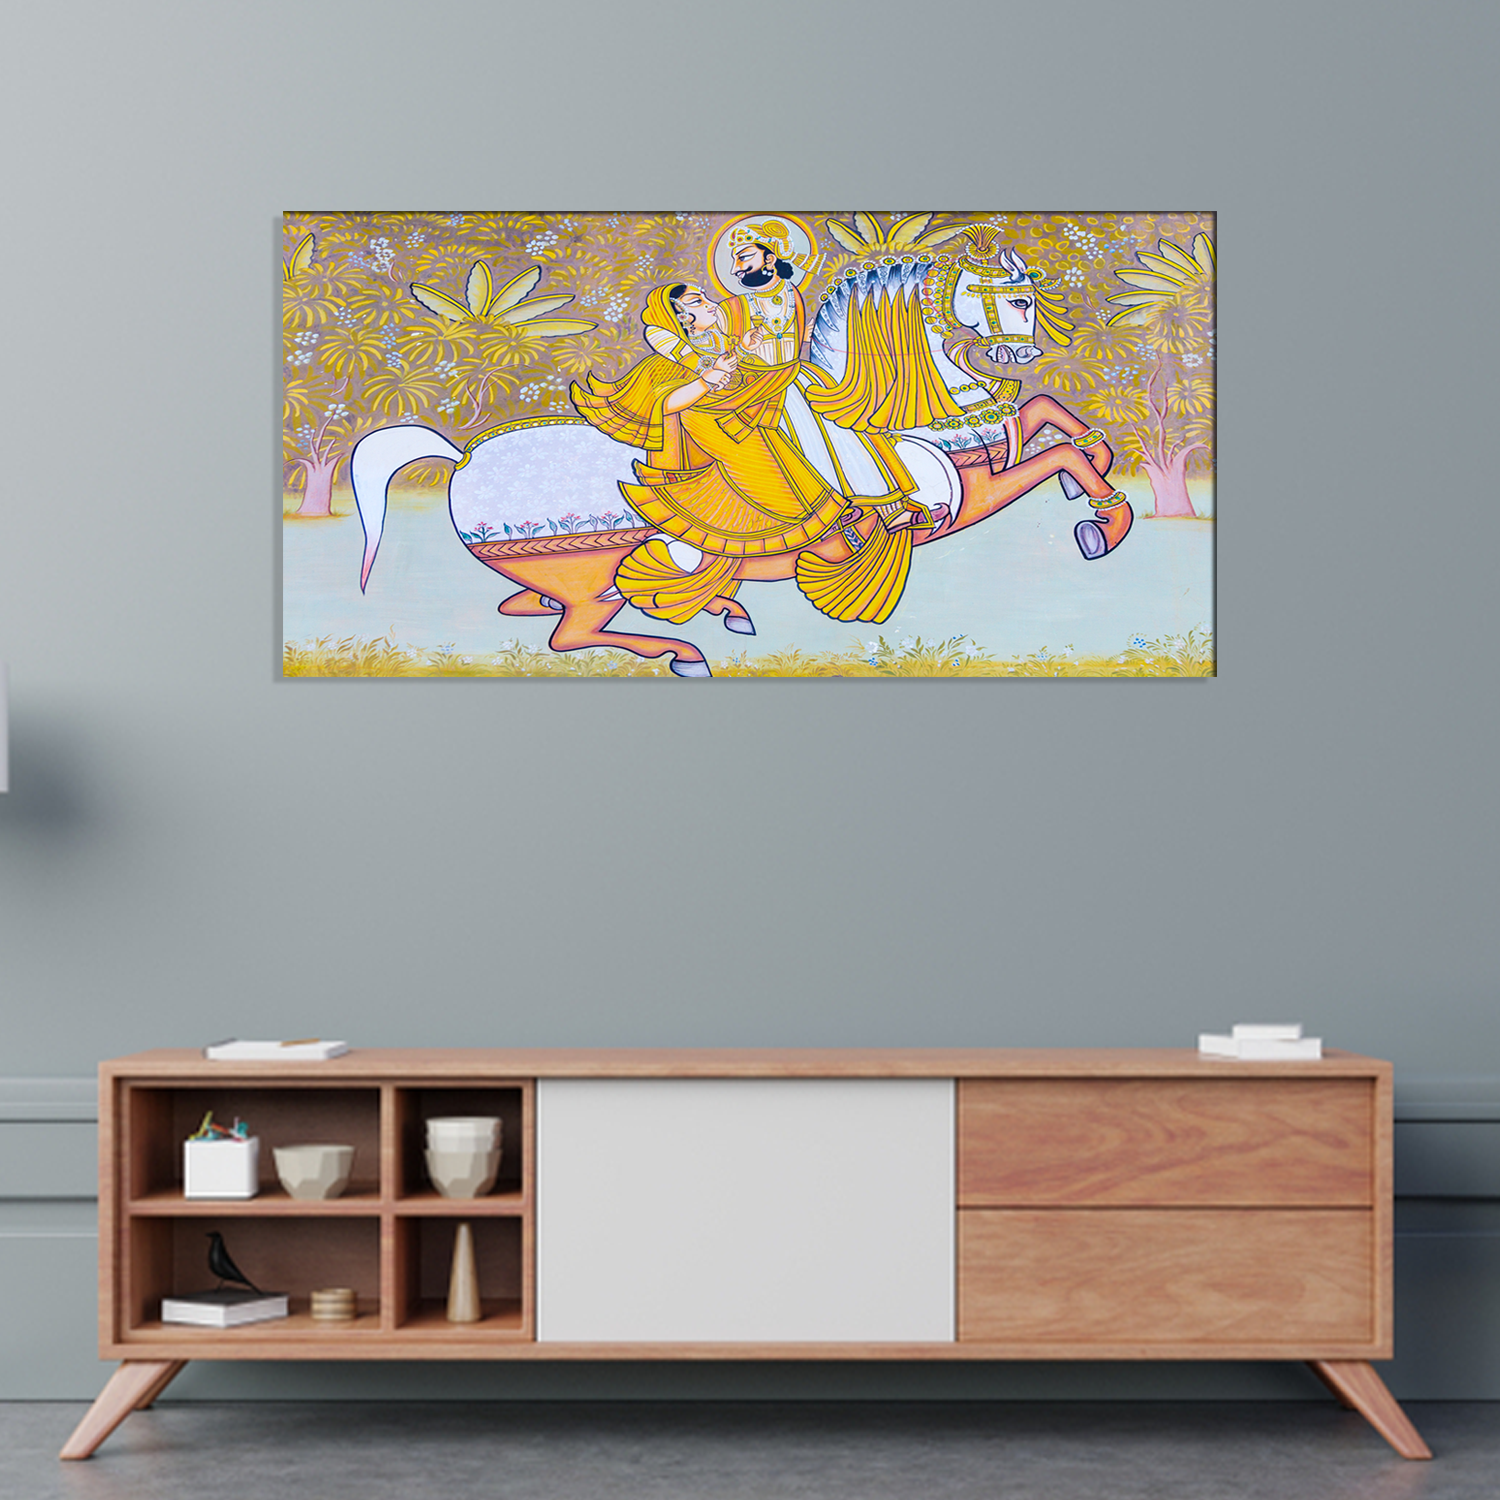 King and Queen Modern Art Canvas Print Wall Painting